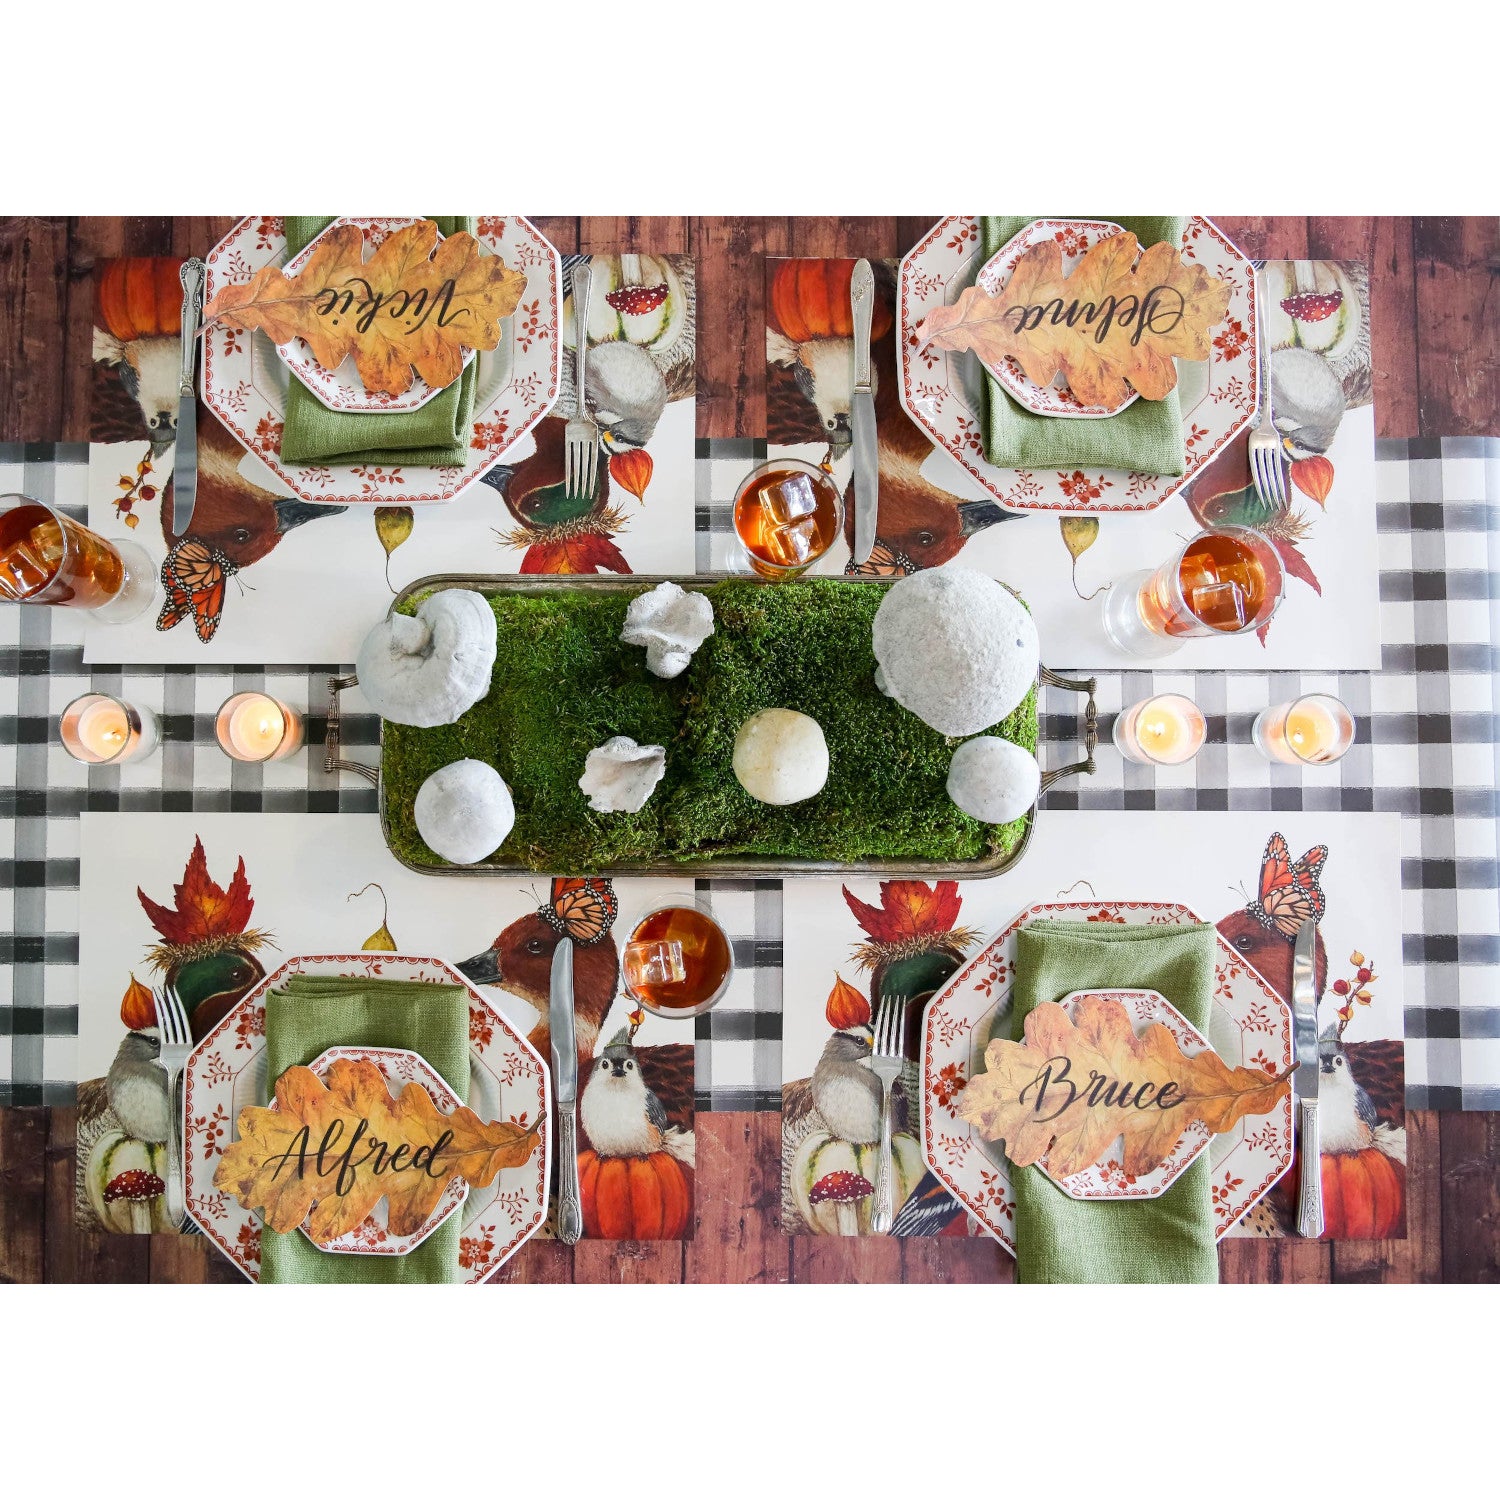 The We Gather Together Placemat under an elegant fall-themed table setting for four, from above.